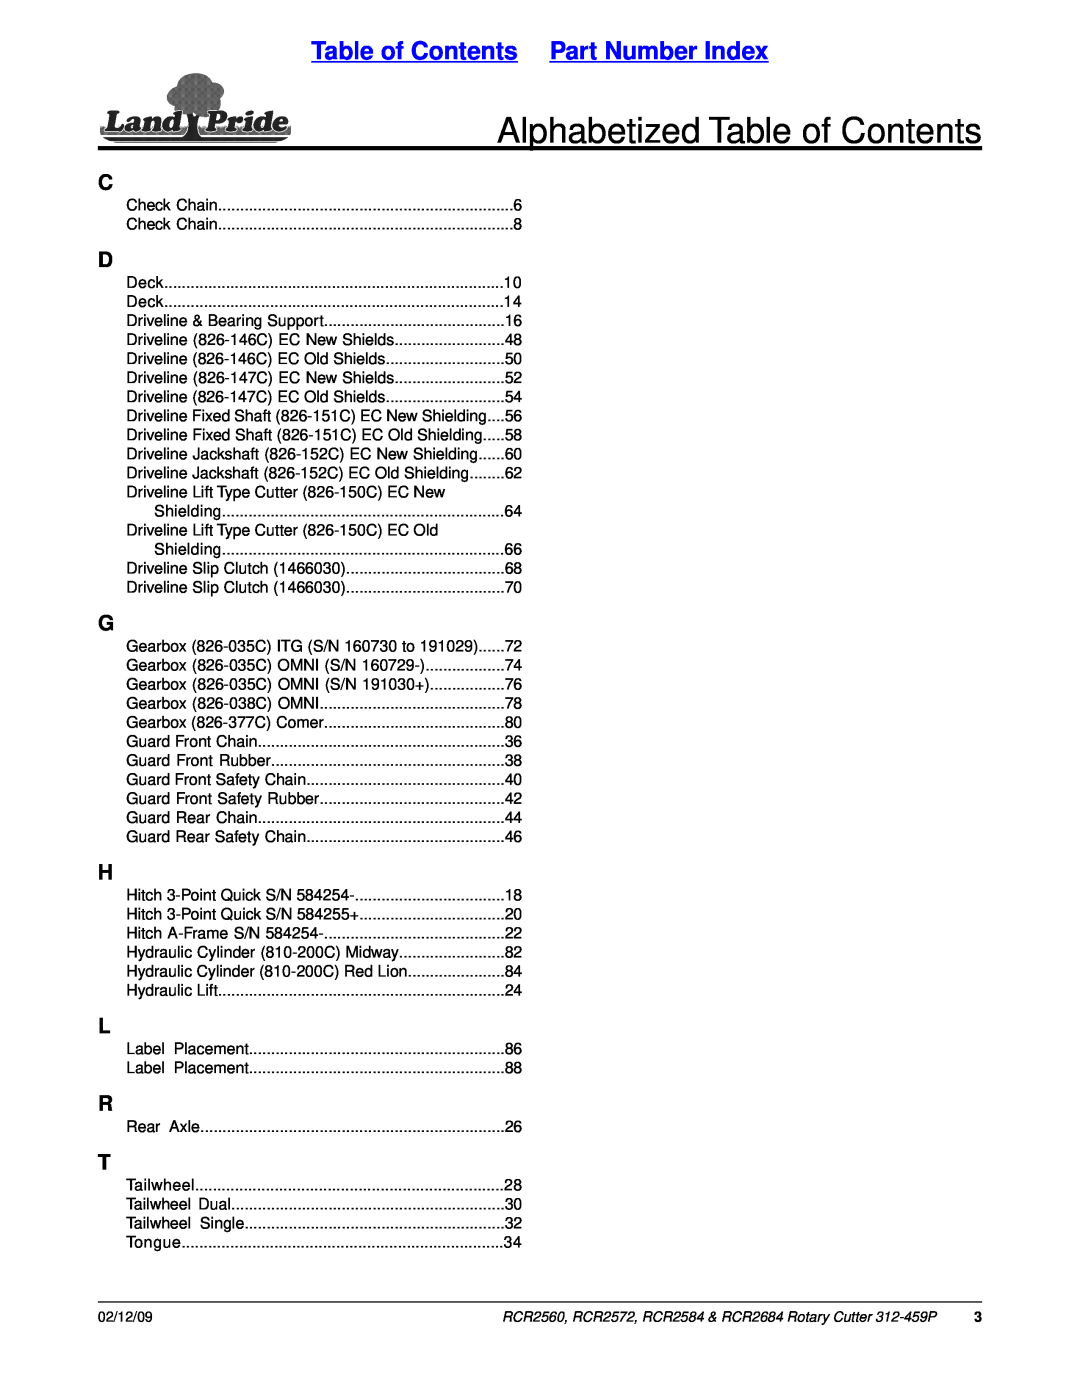 Land Pride RCR2560, RCR2684, RCR2584, RCR2572 manual Alphabetized Table of Contents, Table of Contents Part Number Index 